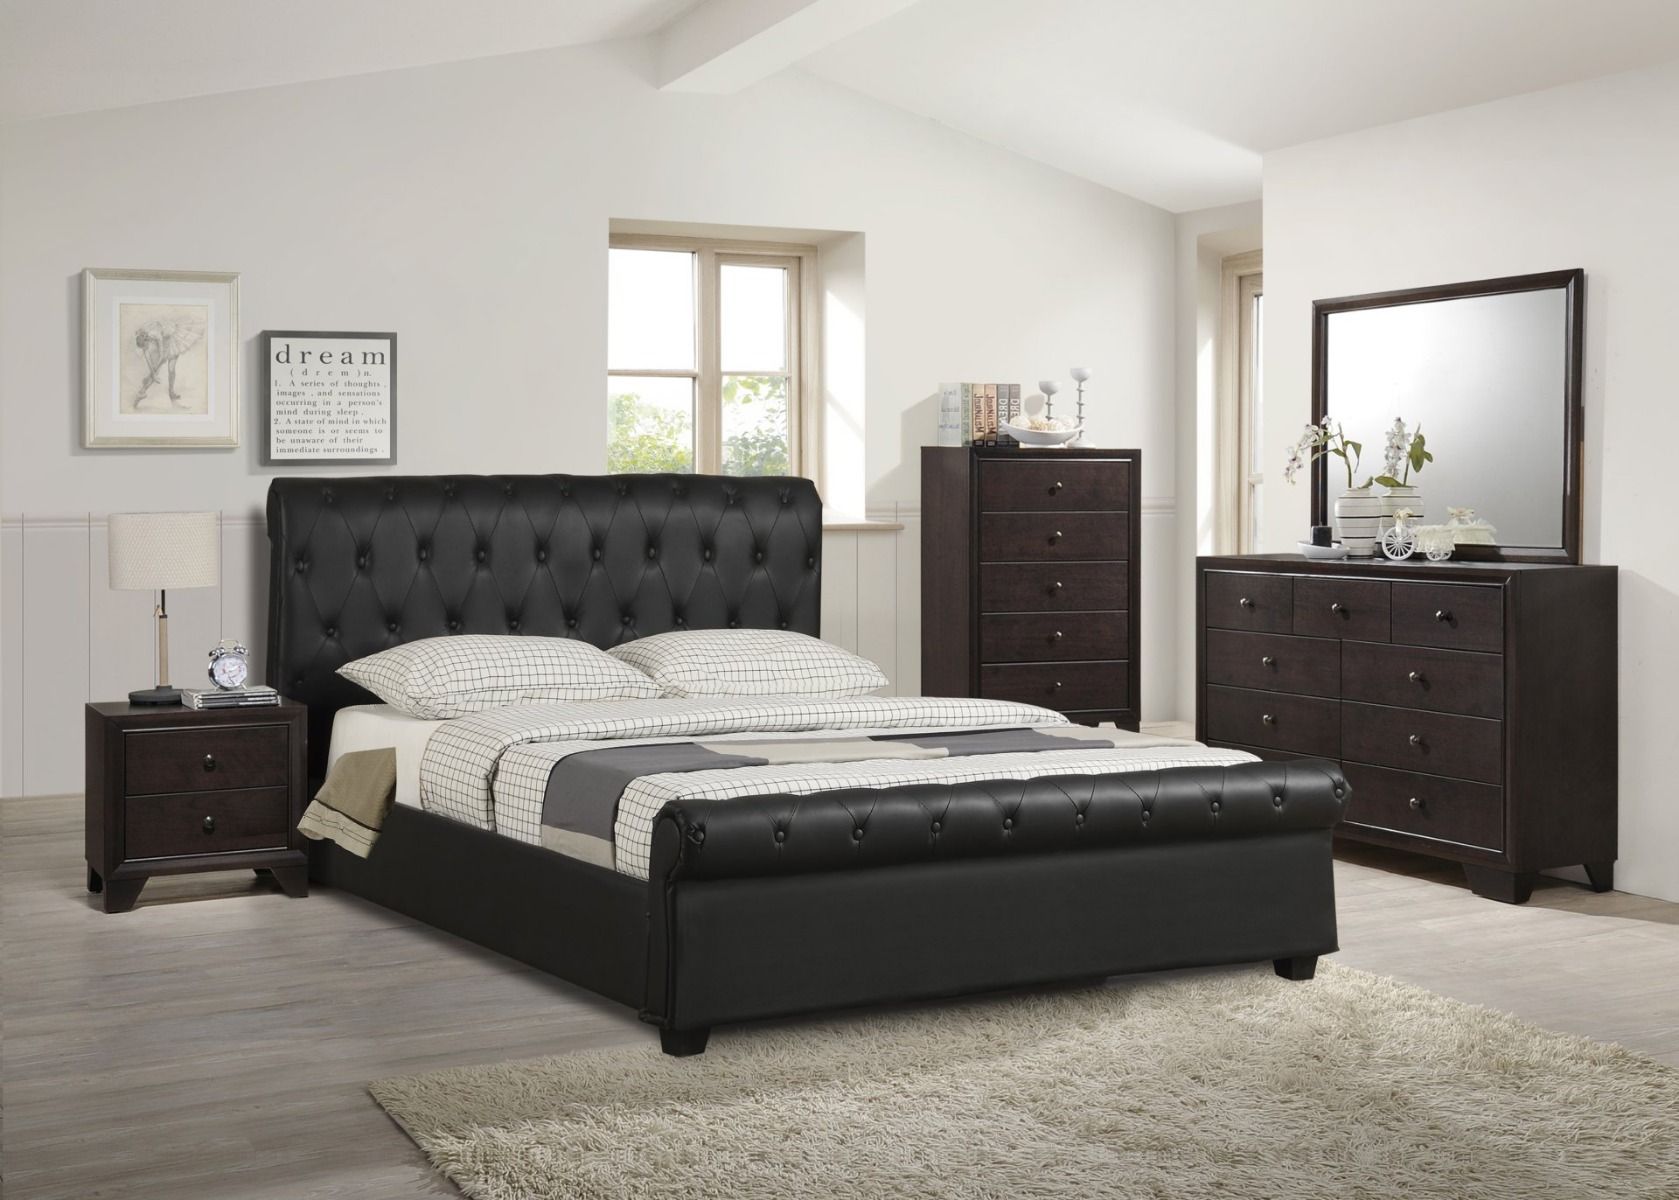 F9246 Bedroom Set In Black Finish By Poundex Furniture